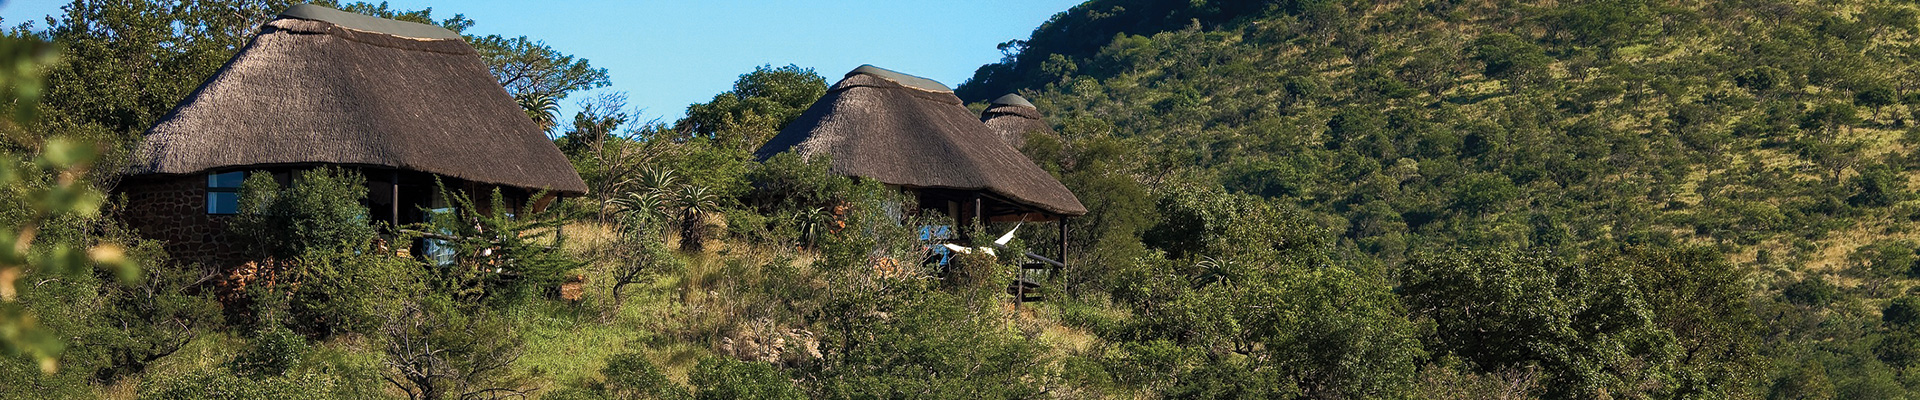 5* Leopard Mountain Game Lodge - Near Hluhluwe Package (2 Nights)